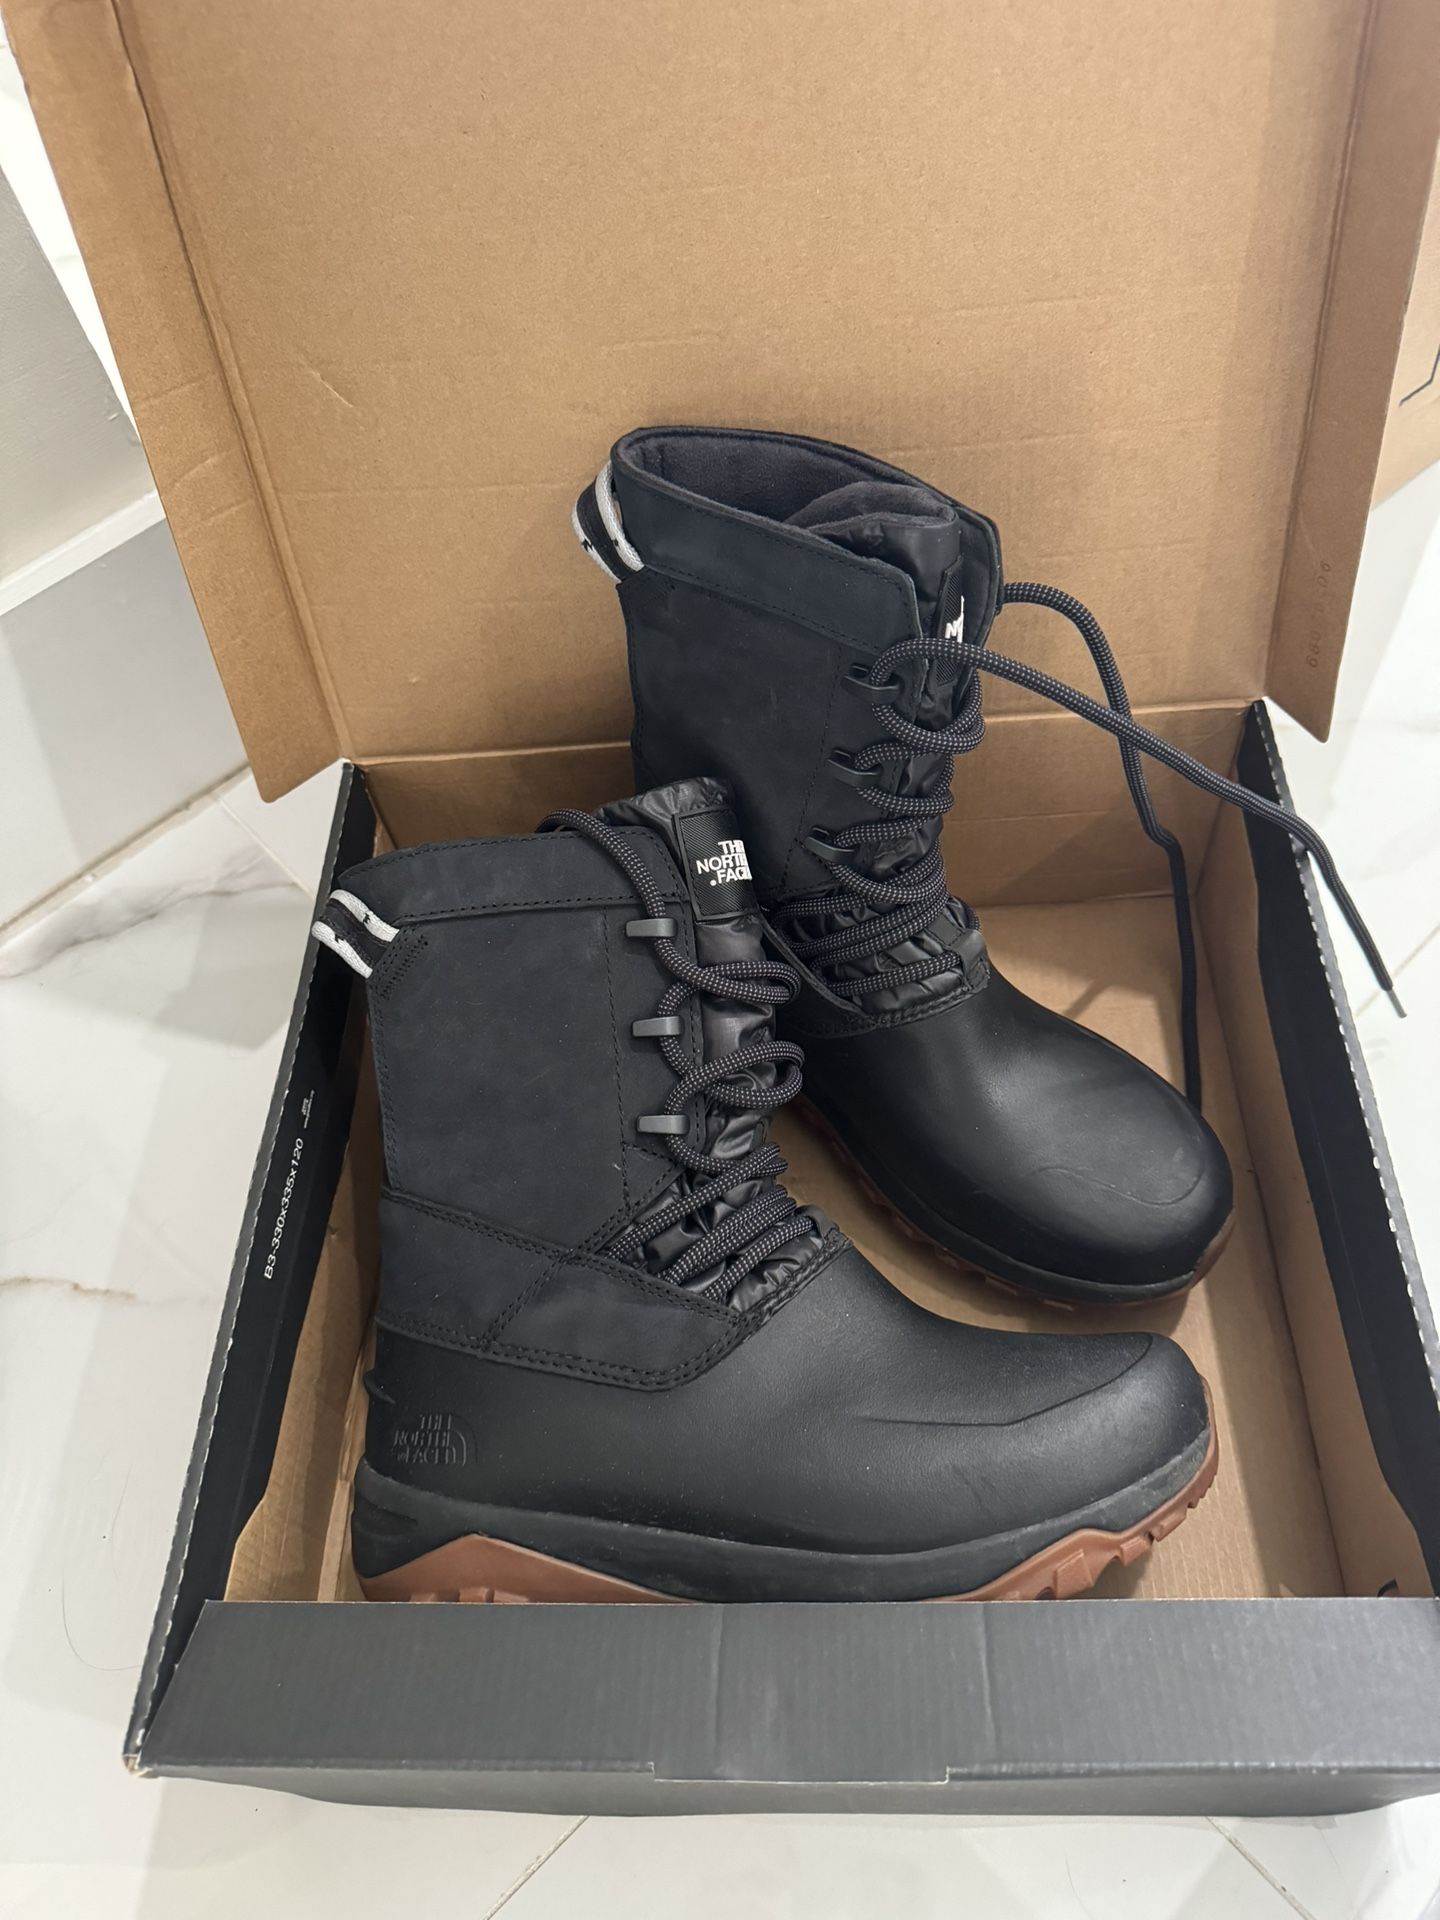 Worn once North Face Waterproof Winter Boots M7/F 8.5